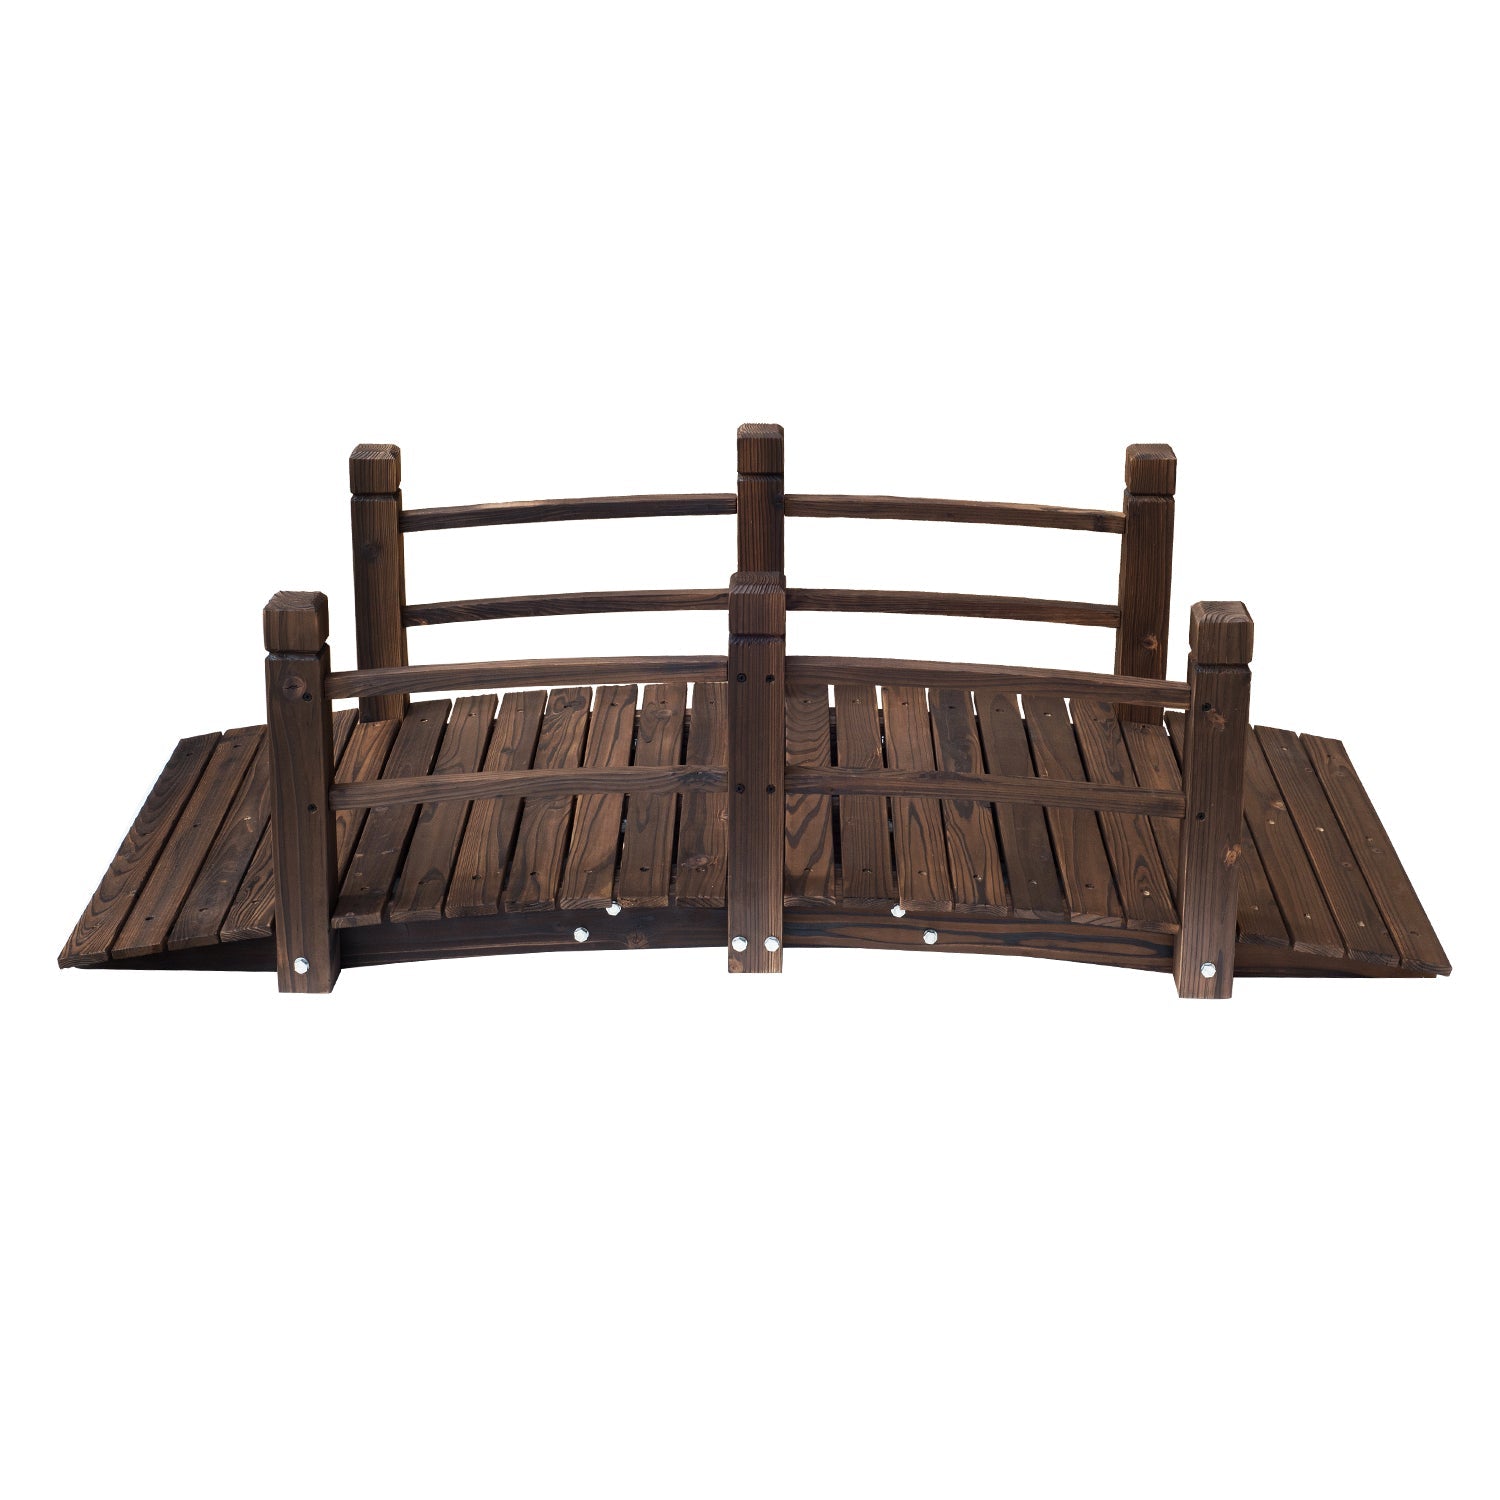 Outsunny 1.5M Wooden Garden Bridge Lawn Décor Stained Finish